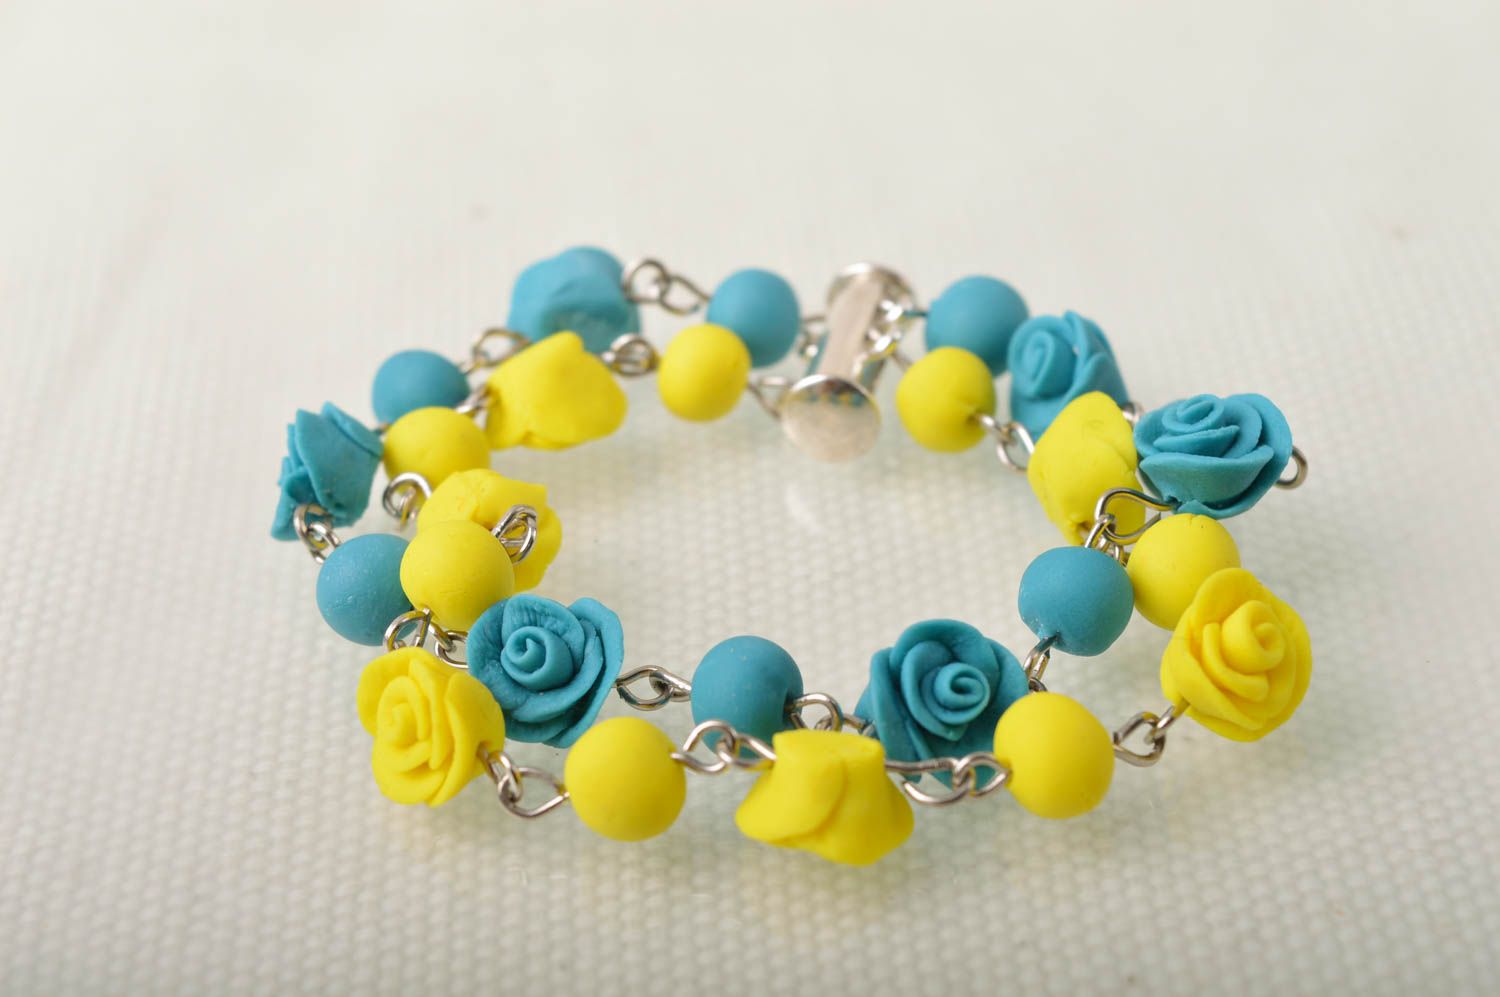 Handmade bright wrist bracelet with blue and yellow cold porcelain rose flowers photo 1